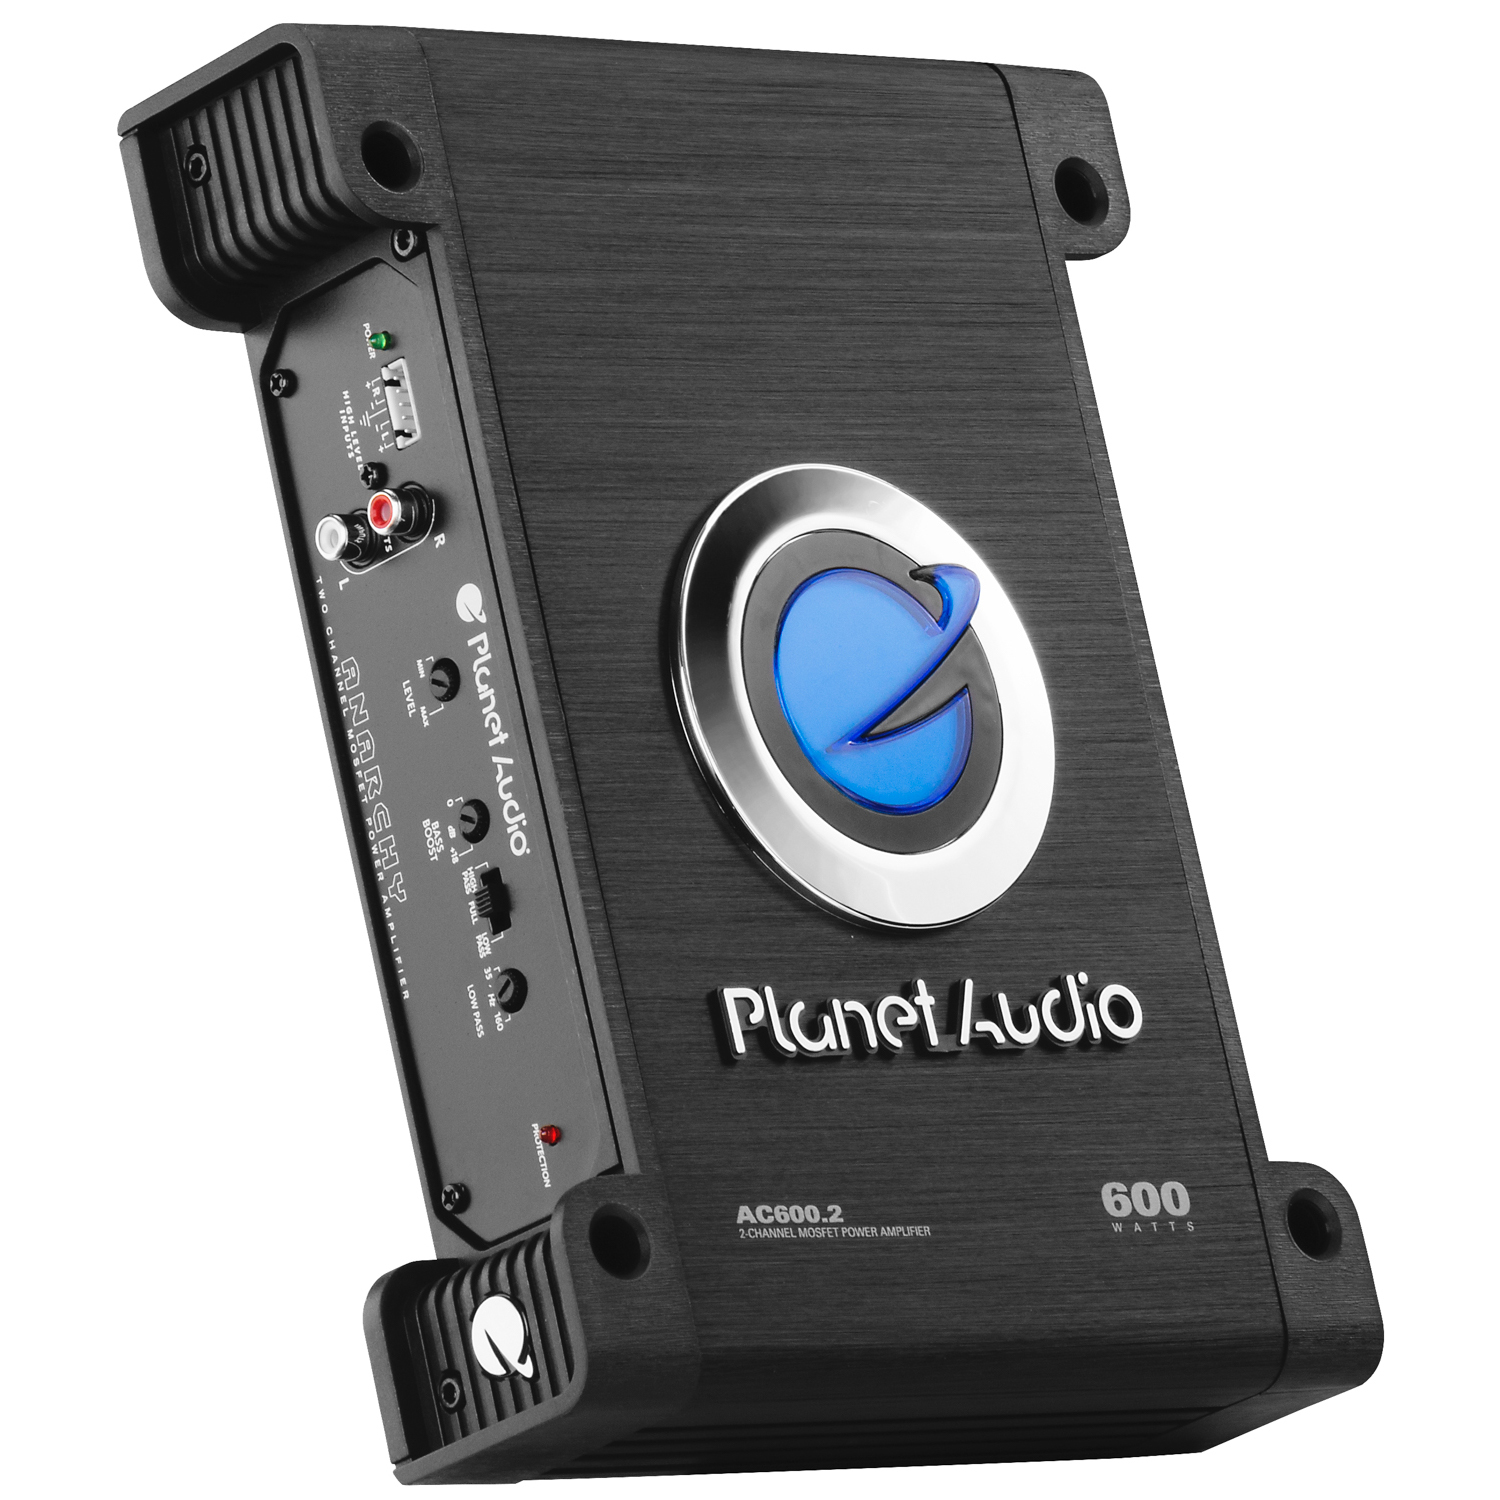 Planet Audio AC600.2 Anarchy Series Car Audio Amplifier - 600 High Output, 2 Channel, Class A/B, High/Low Level Inputs, High/Low Pass Crossover, Bridgeable, Full Range, For Stereo and Subwoofer - image 1 of 9